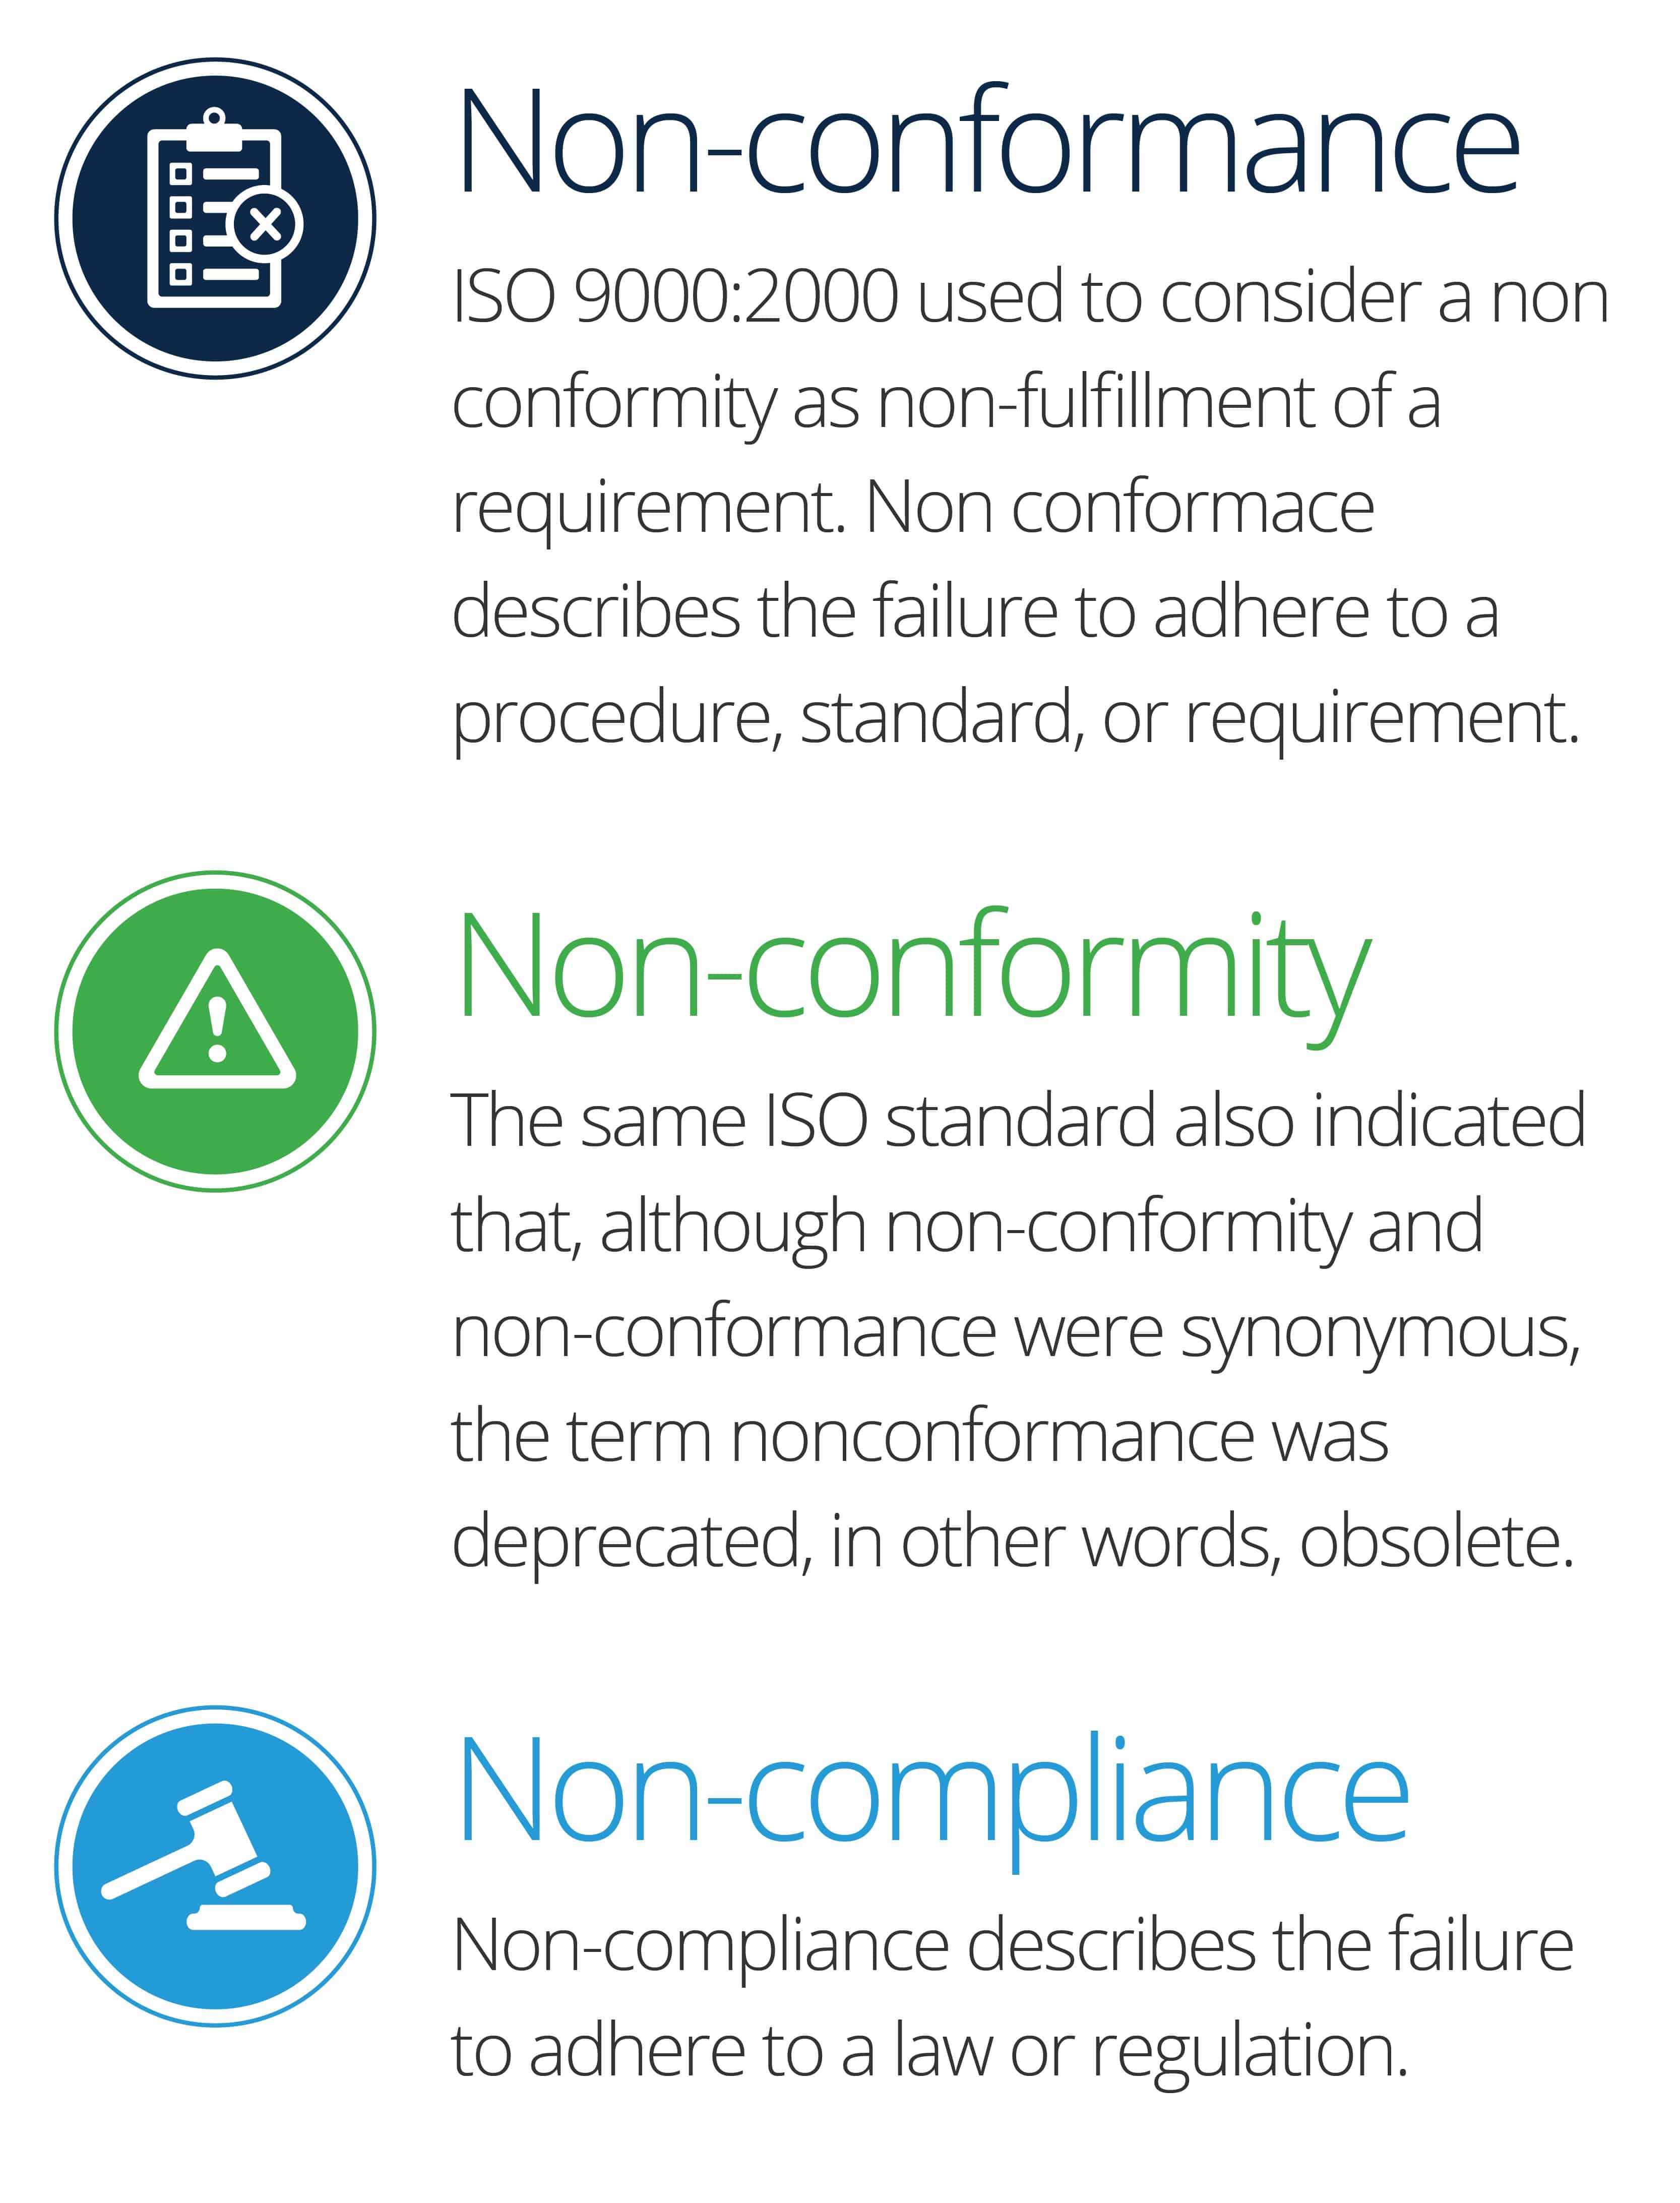 The meaning of Non-Conformance and Non-Compliance